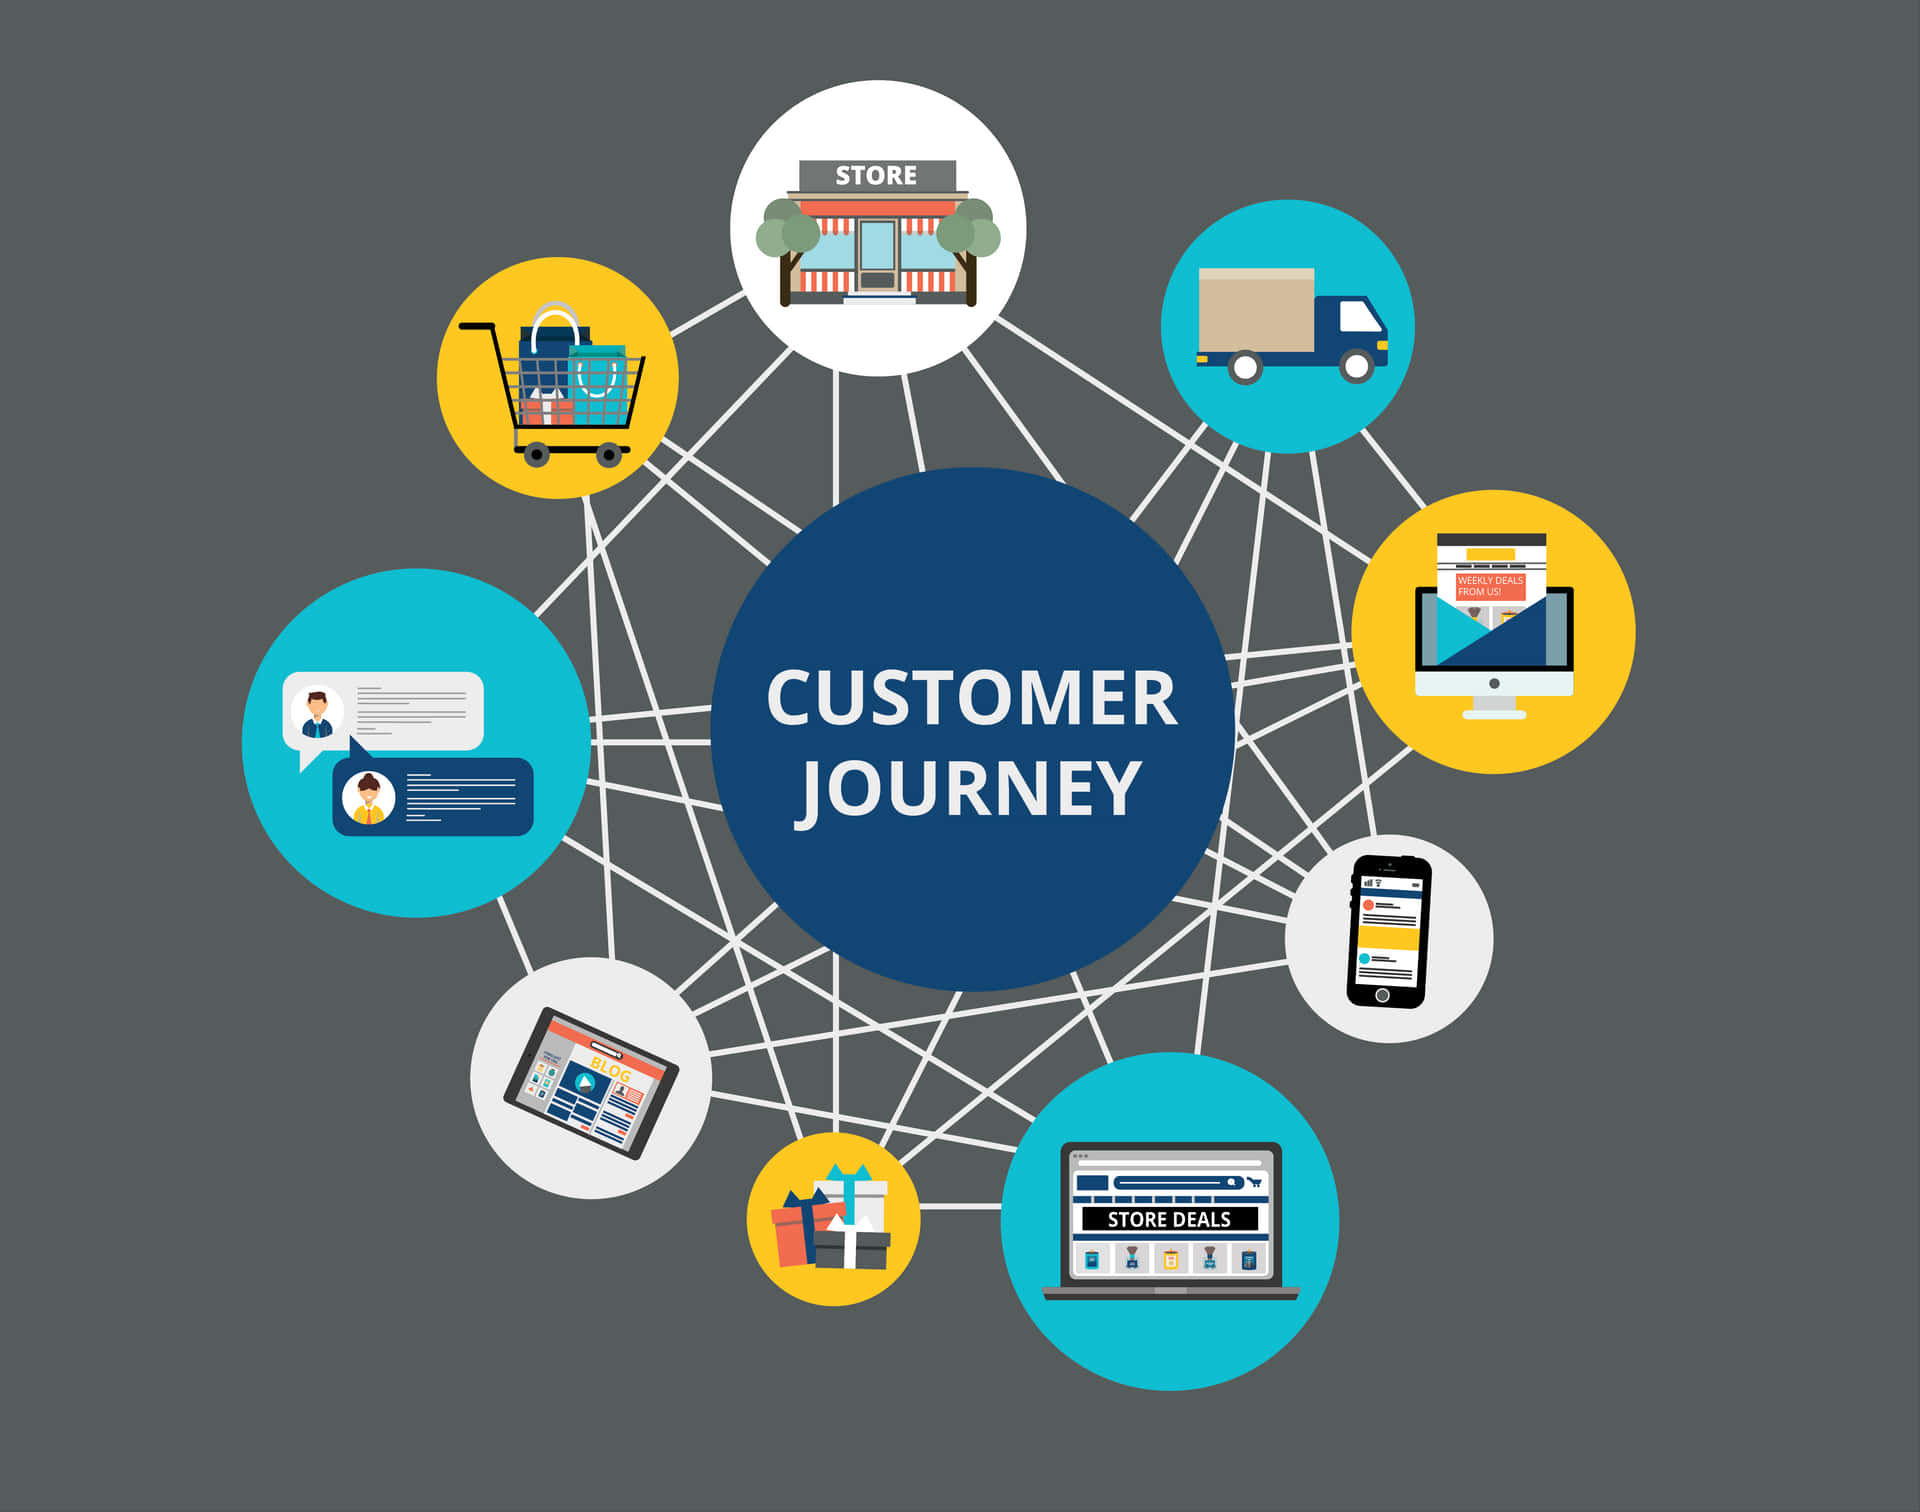 Customer Journey - A Circle Of Icons